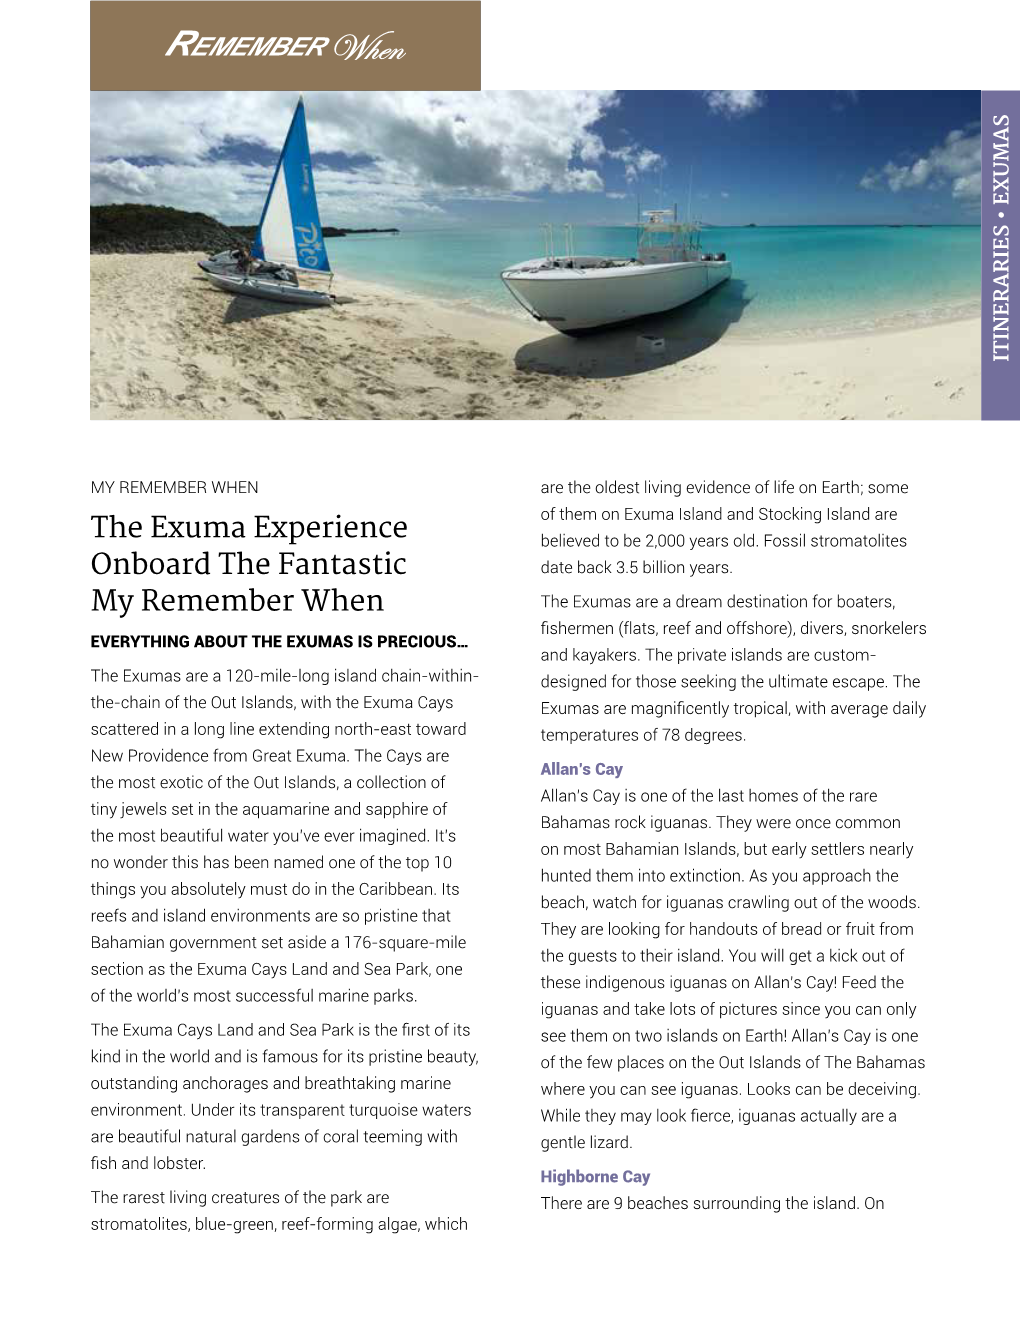 The Exuma Experience Onboard the Fantastic My Remember When